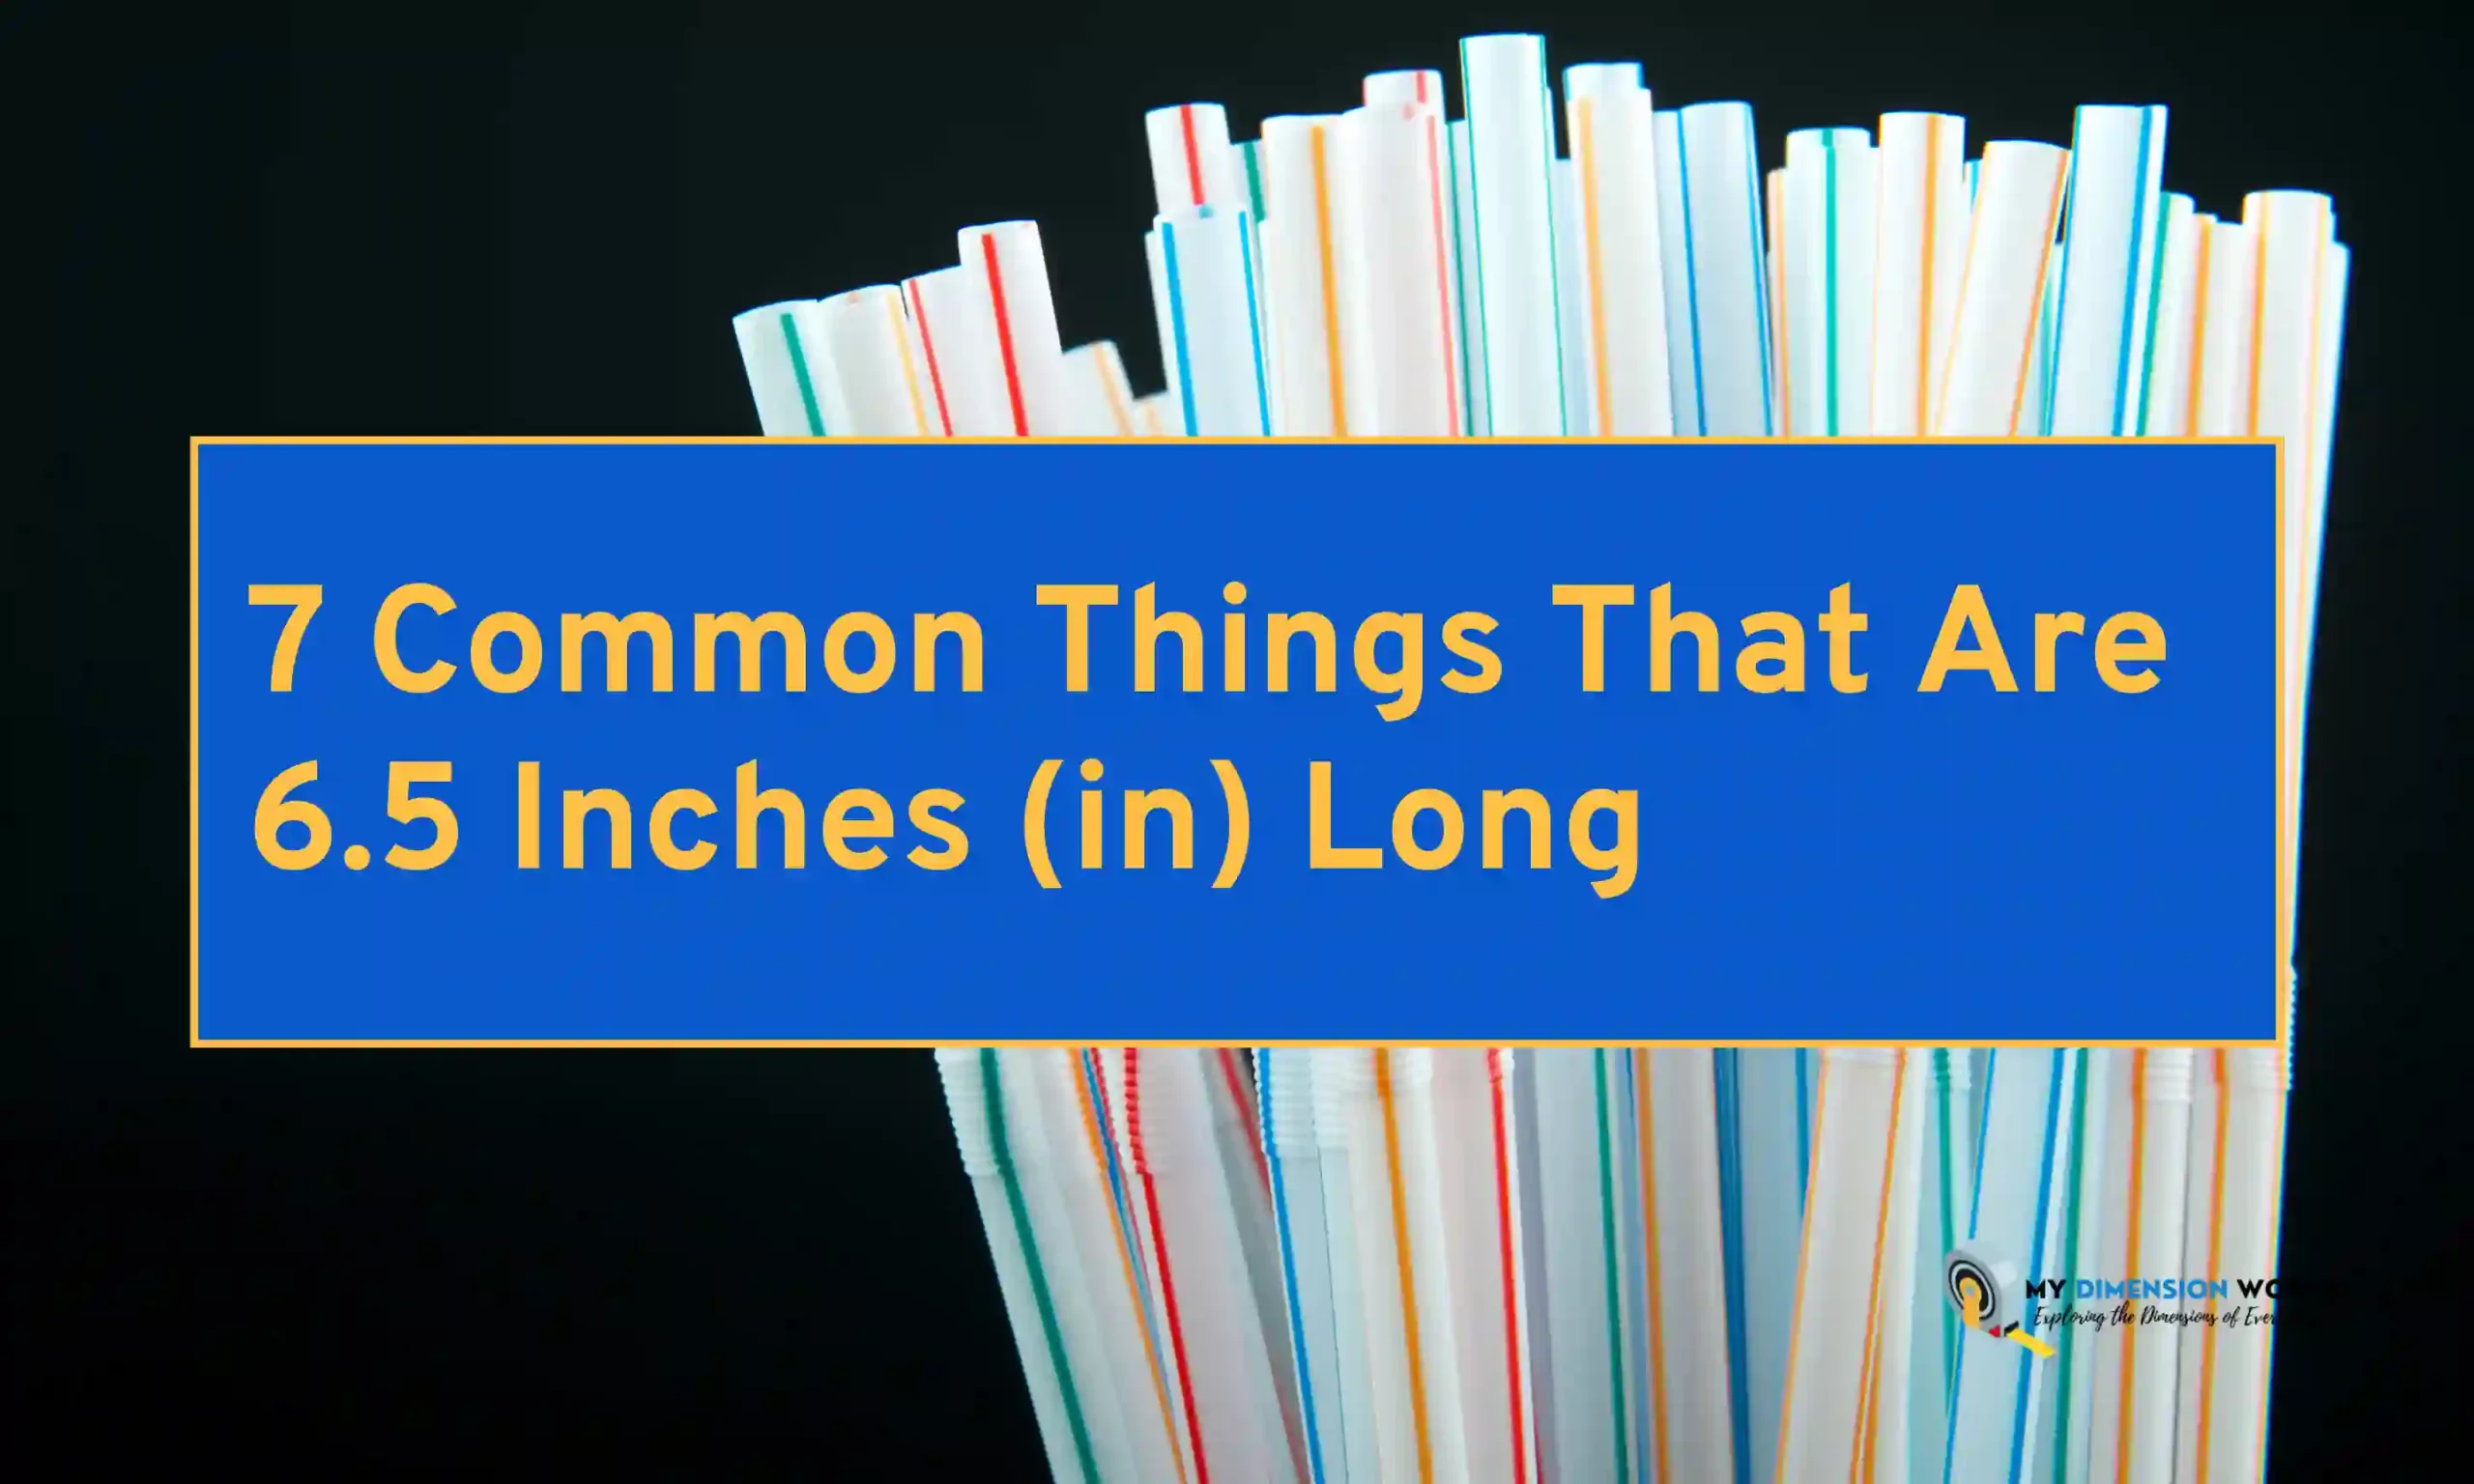 7 Common Things That Are 6.5 Inches (in) Long